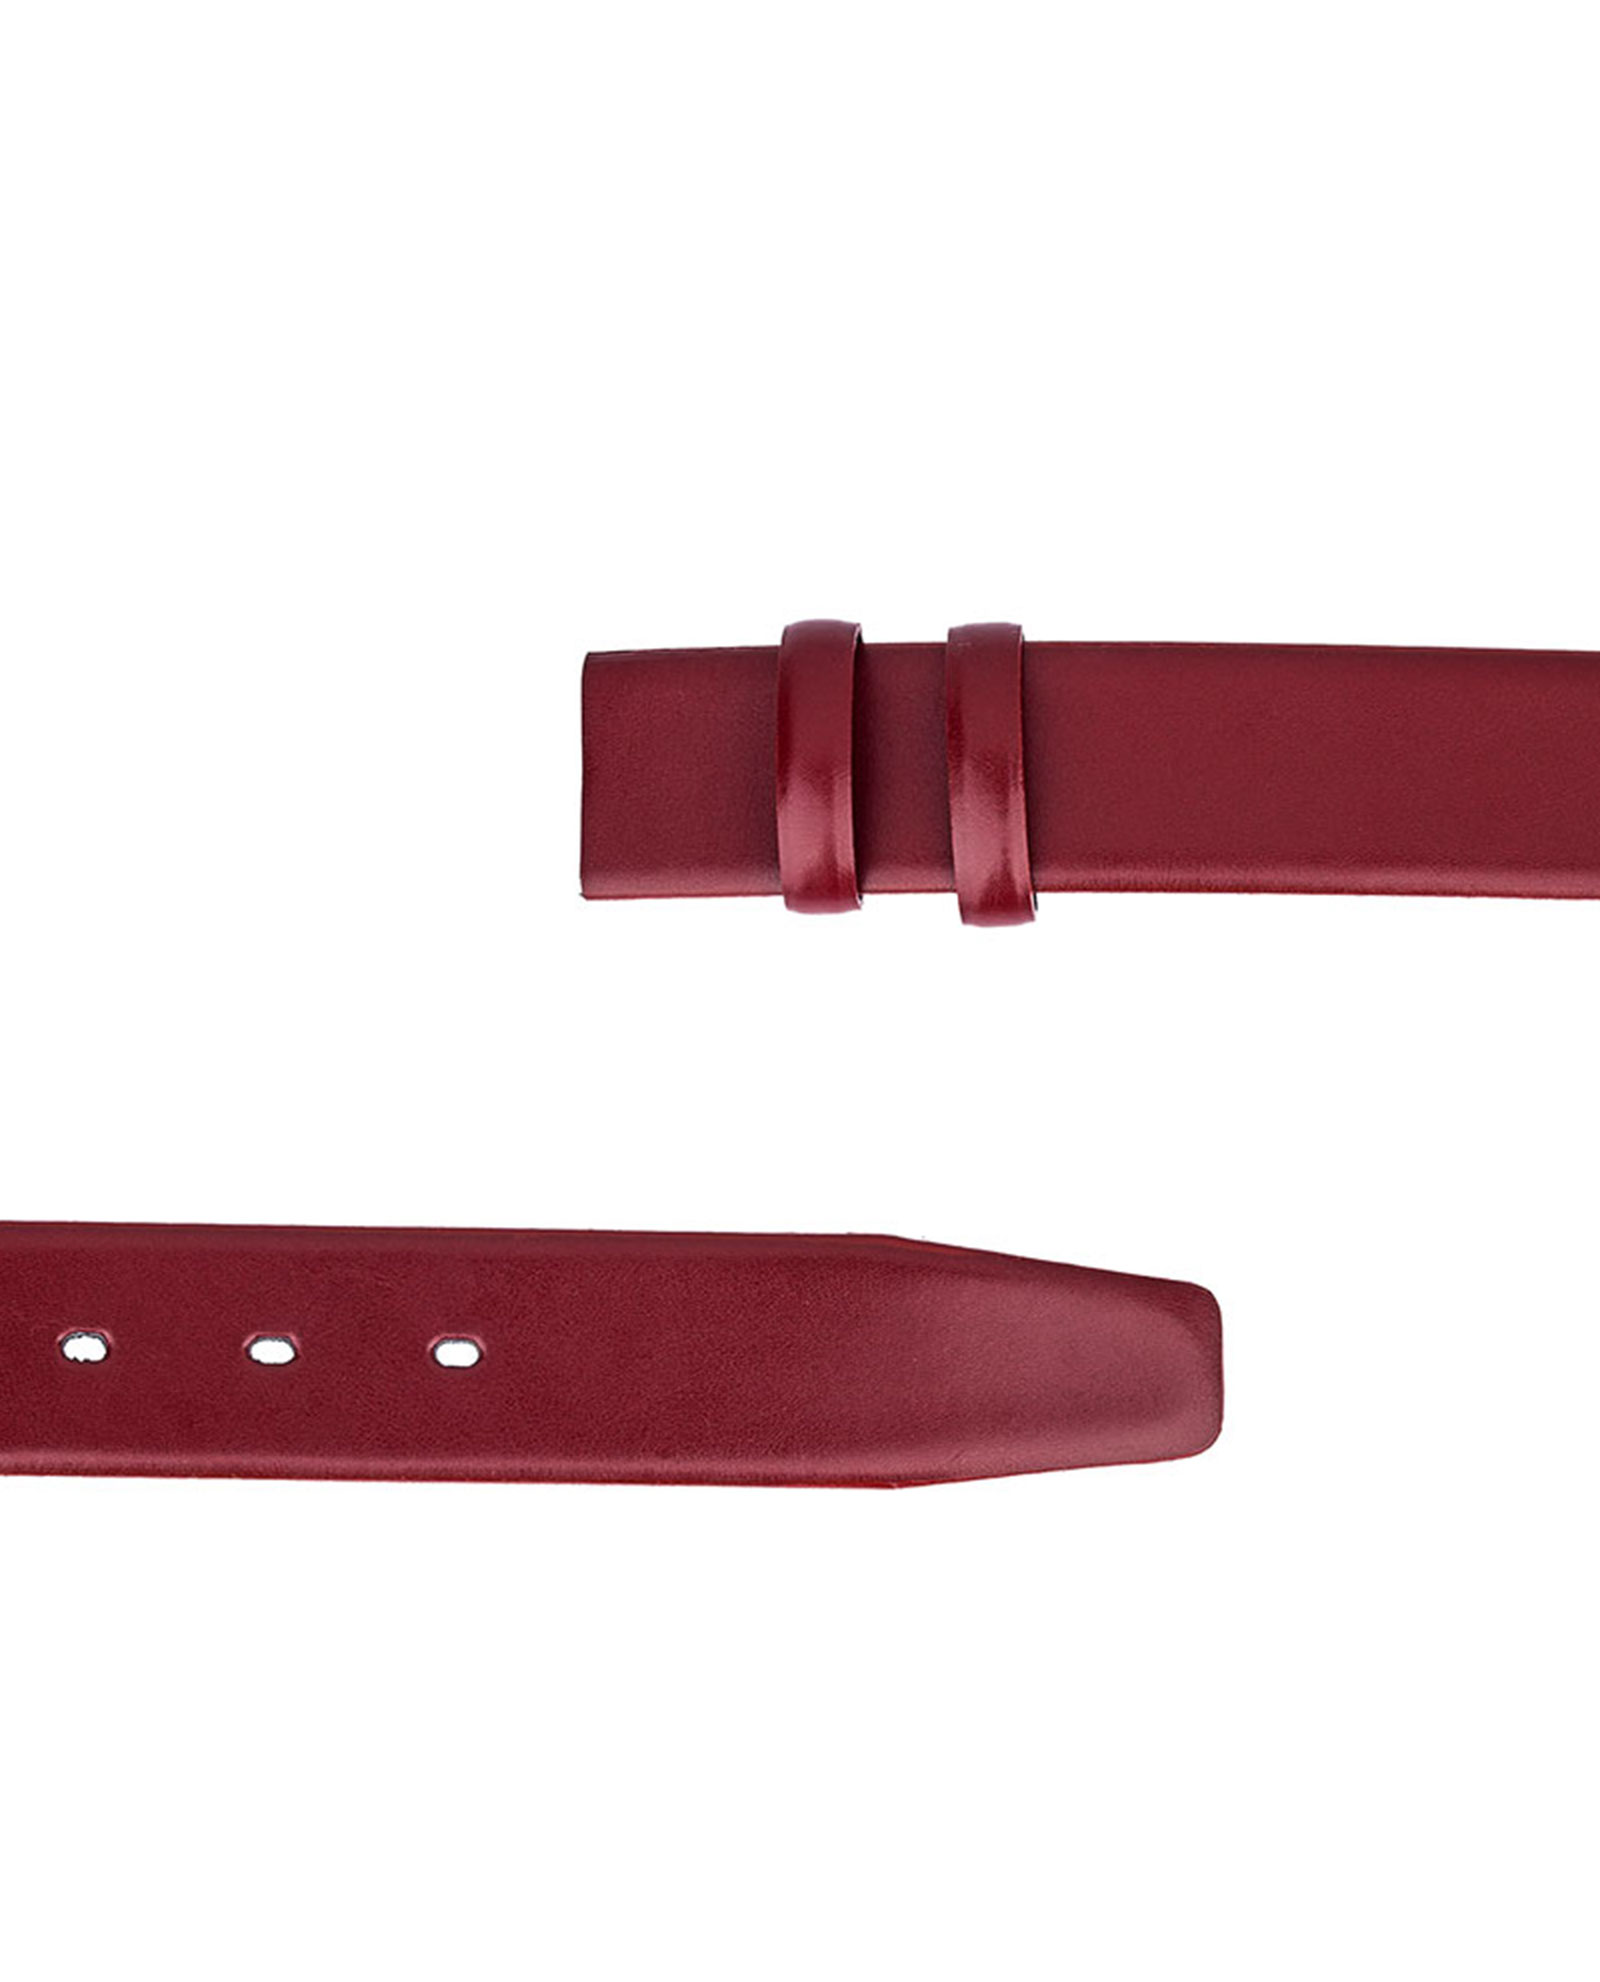 Buy Ruby Red Belt Strap - Adjustable Italian Leather - Freee Shipping